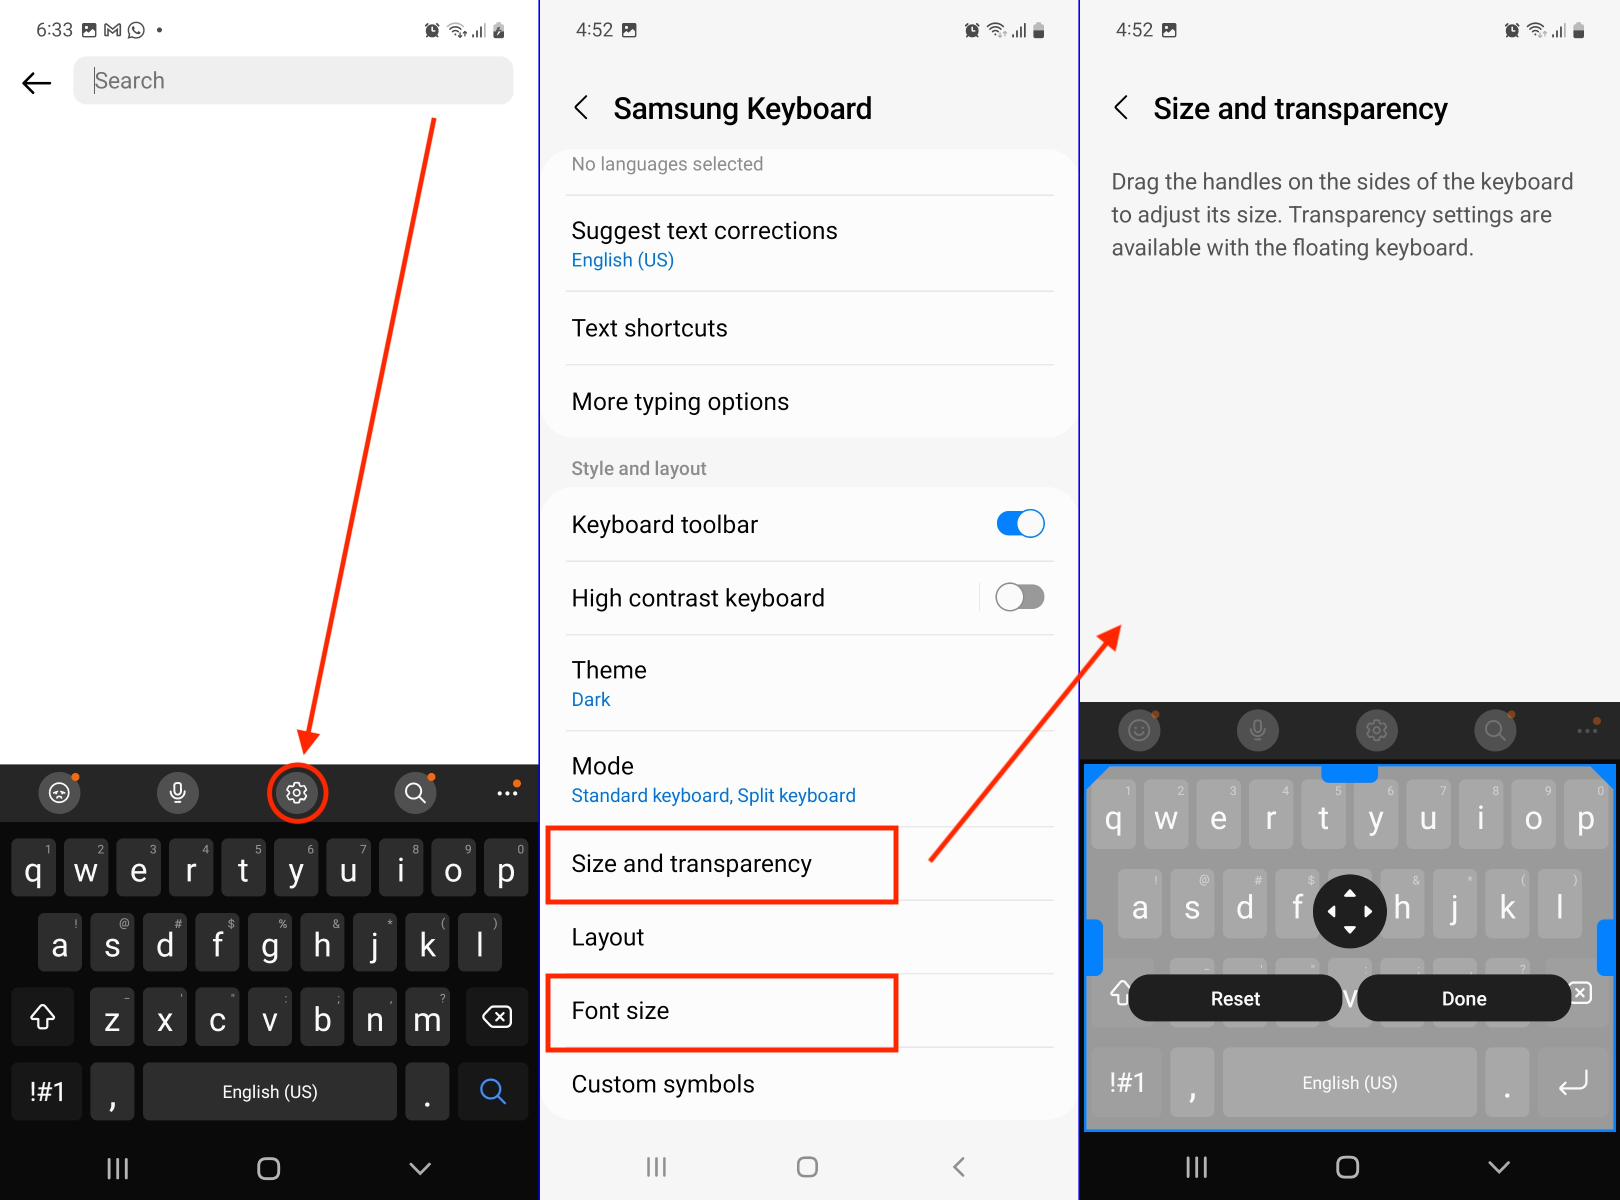 Samsung Keyboards steps to change its layout and font size